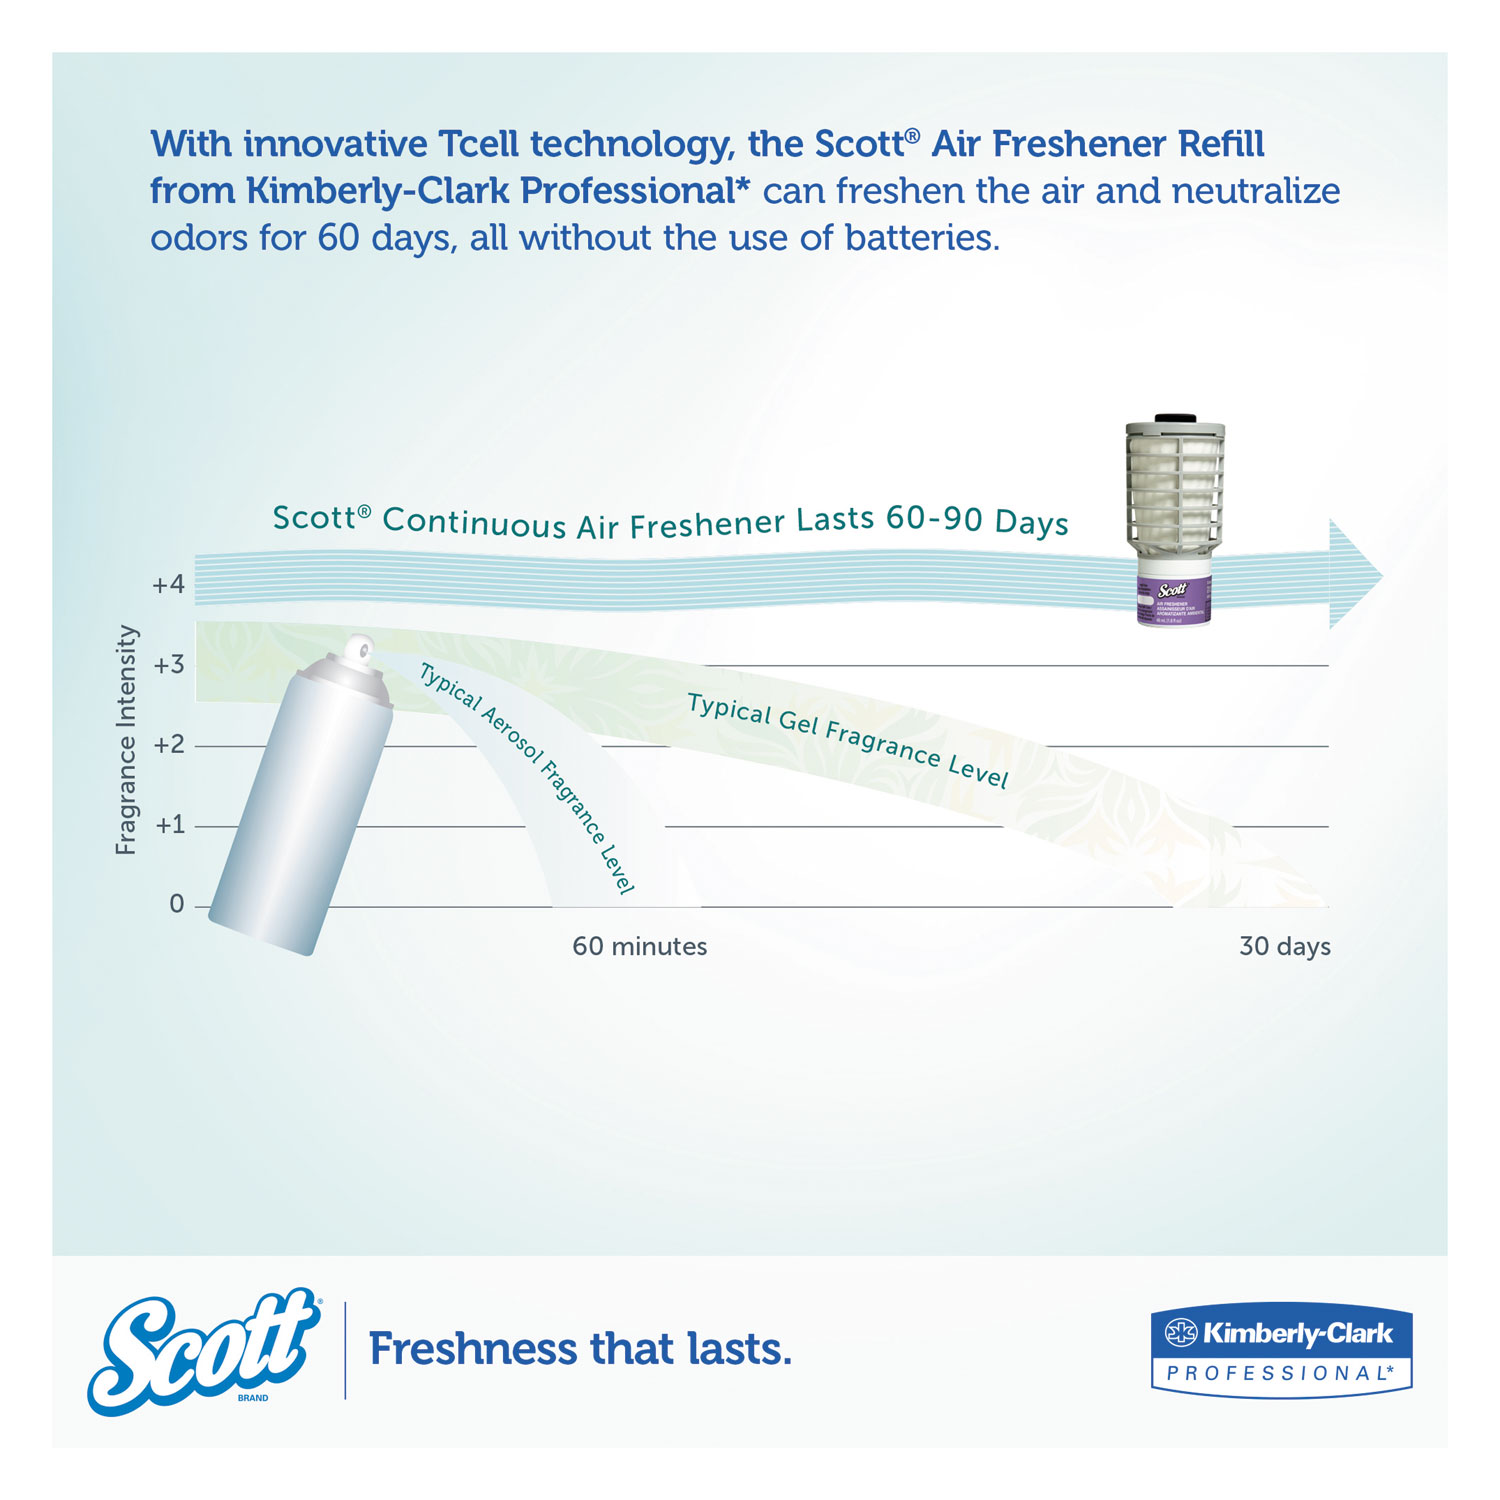 Scott 92621 2.8 in. x 2.4 in. x 5 in. Continuous Air Freshener Dispenser - Smoke - image 5 of 5